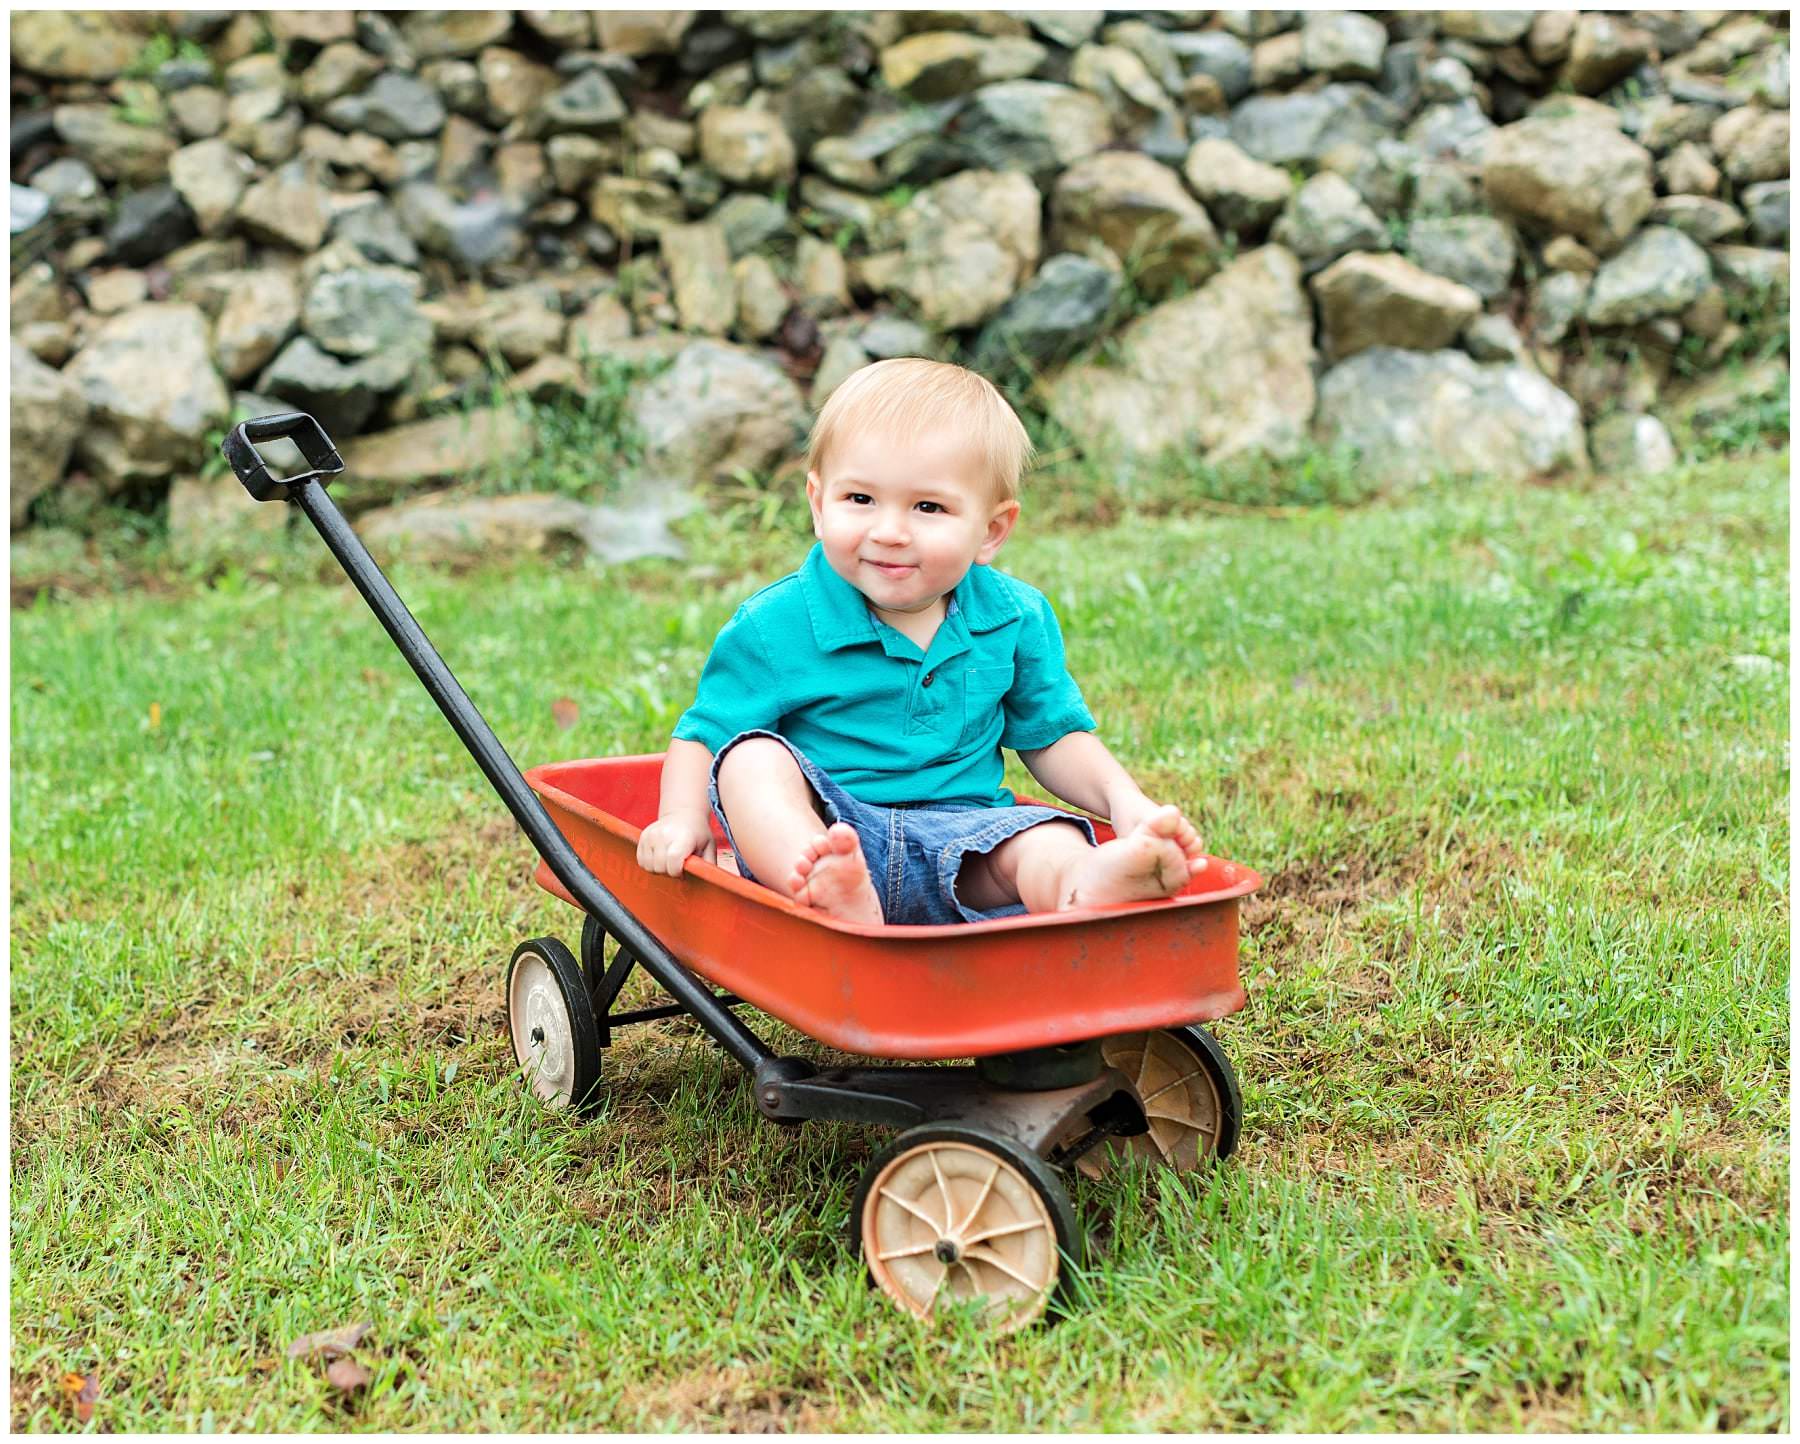 Outdoor kids portraits in wagon with stone wall background